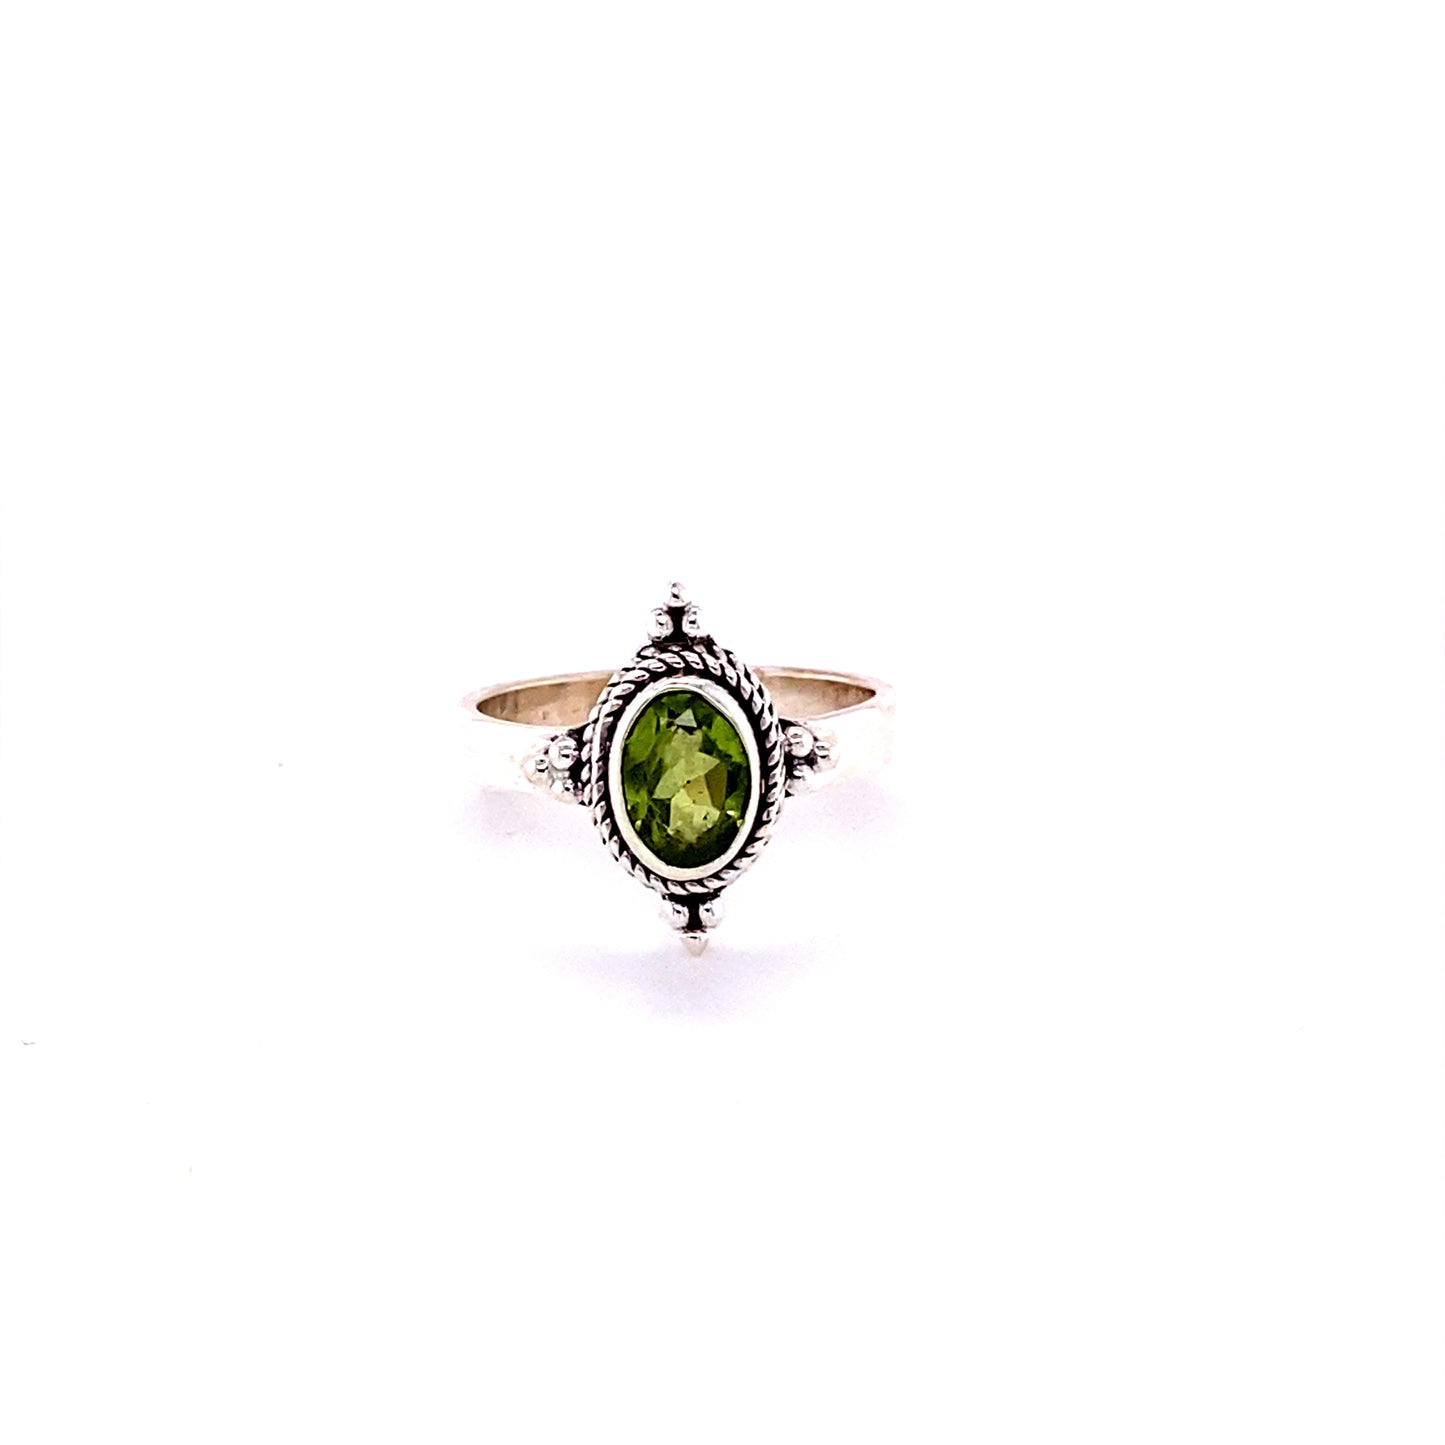 A sterling silver Four Points Gemstone Ring on a white background.